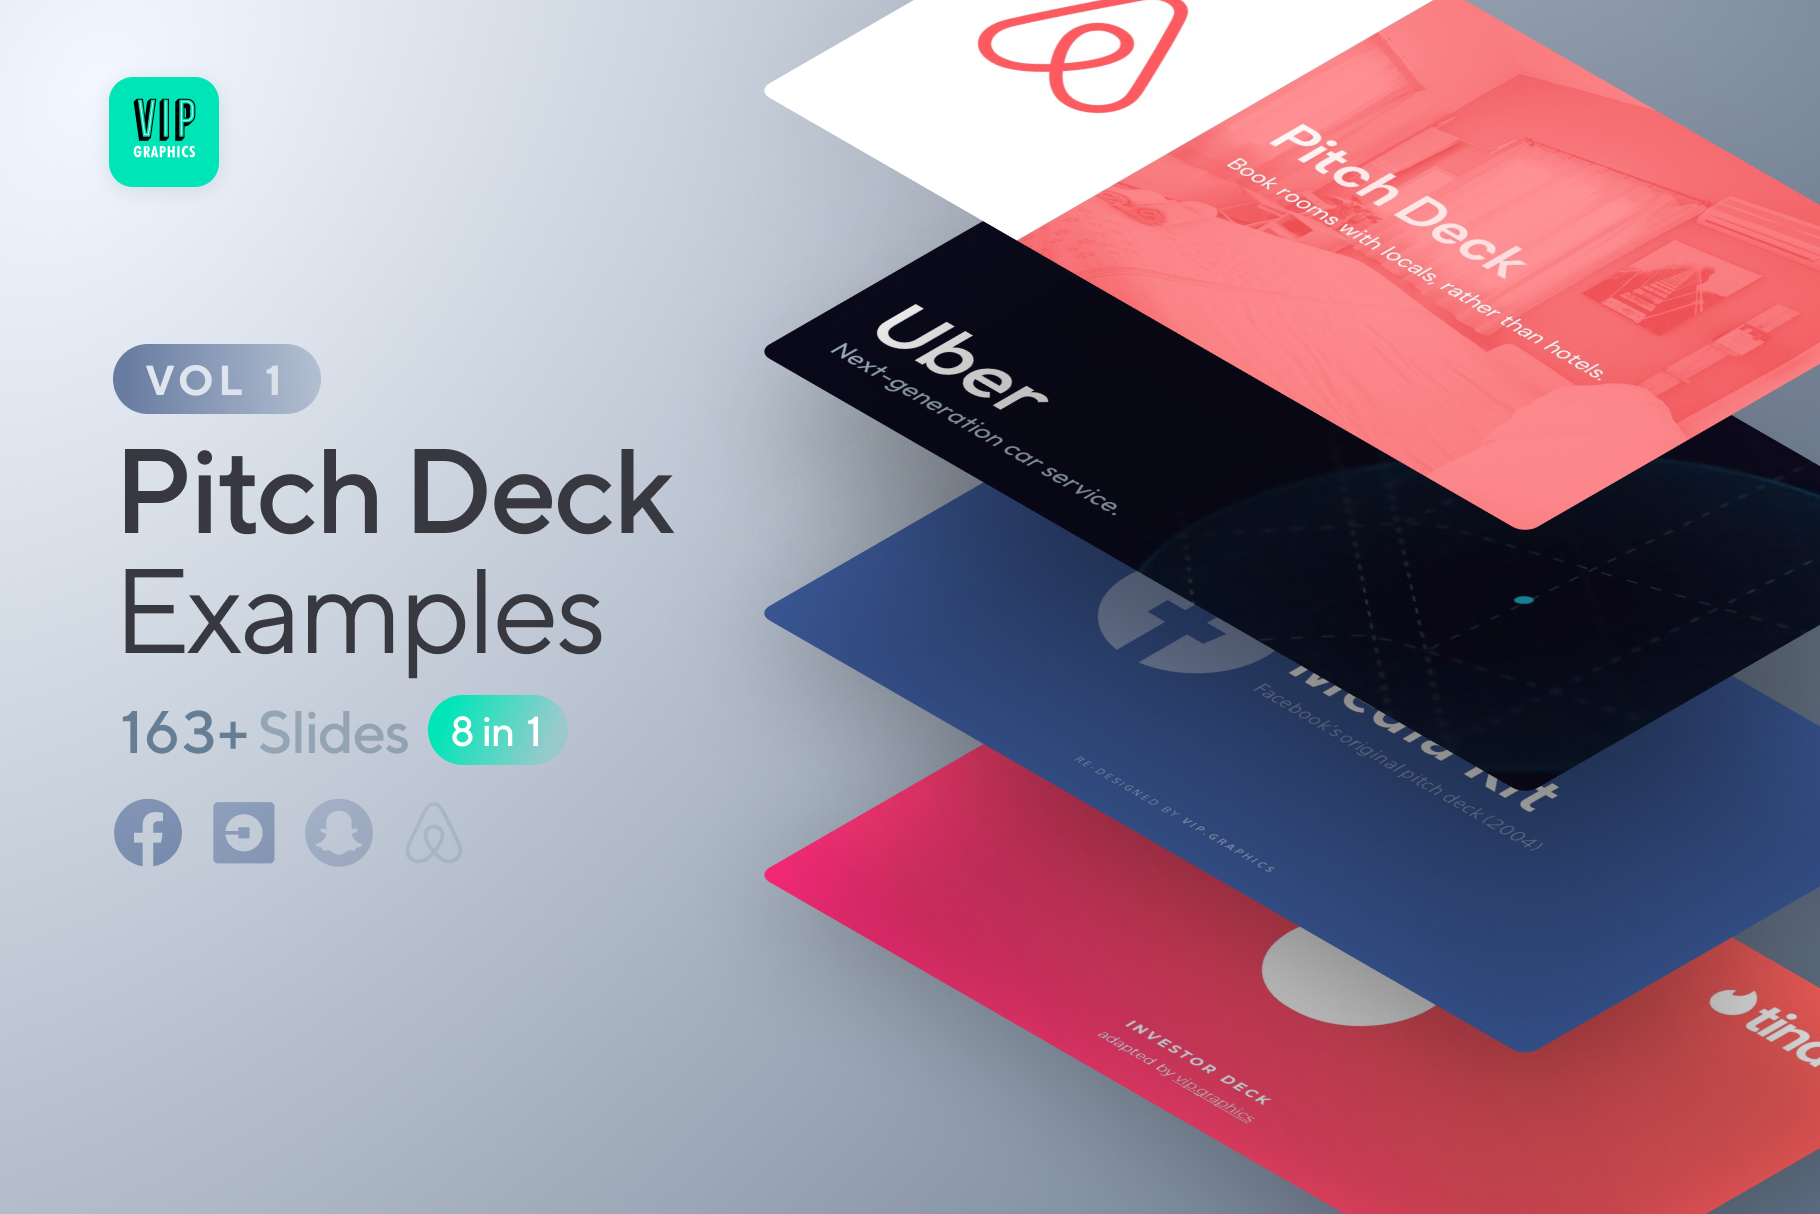 Pitch Deck Examples - Template Bundle: based on winning pitch decks that closed $1B+ for unicorns like Facebook, Uber, Airbnb, etc.